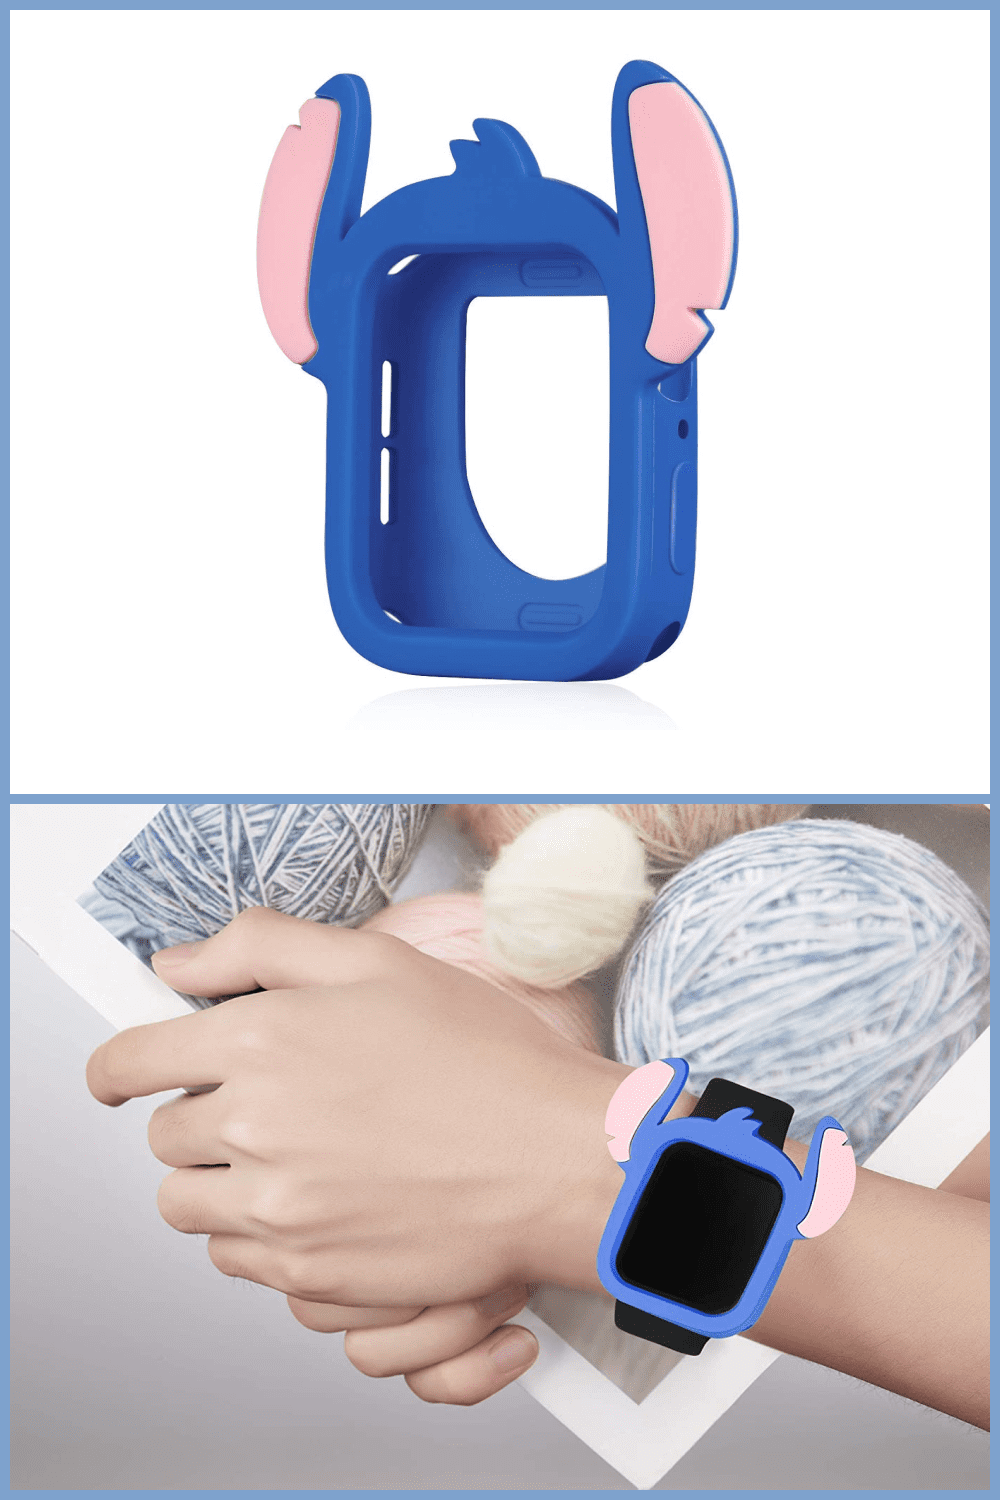 Funny deep blue cover with ears for Apple Watches.